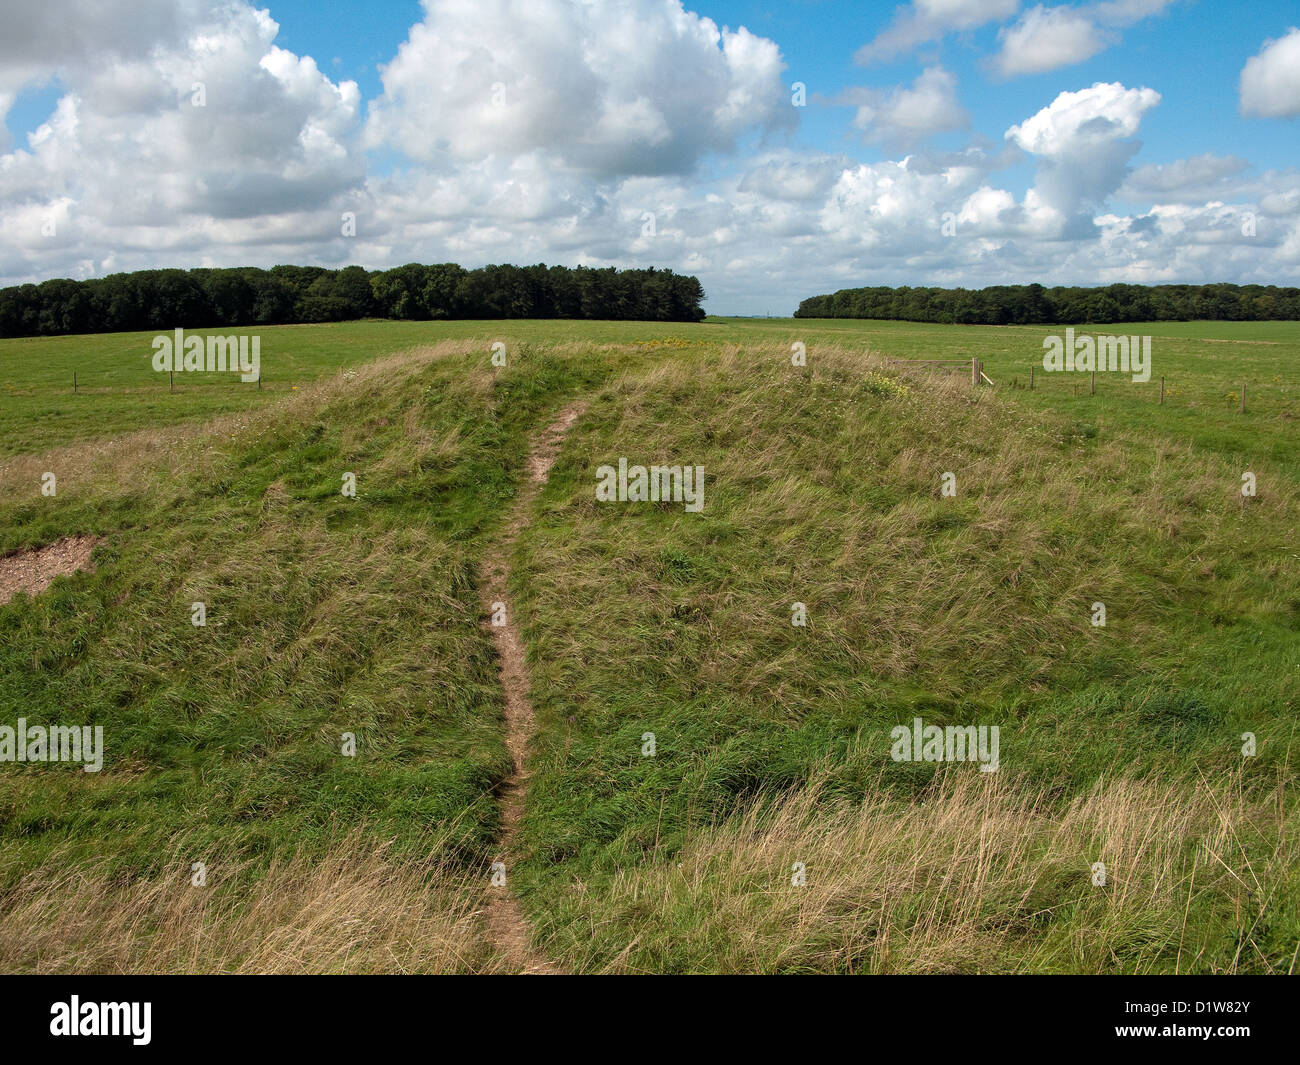 Bowl Barrow Burial mounds at Stonehenge in Wiltshire England UK Stock Photo